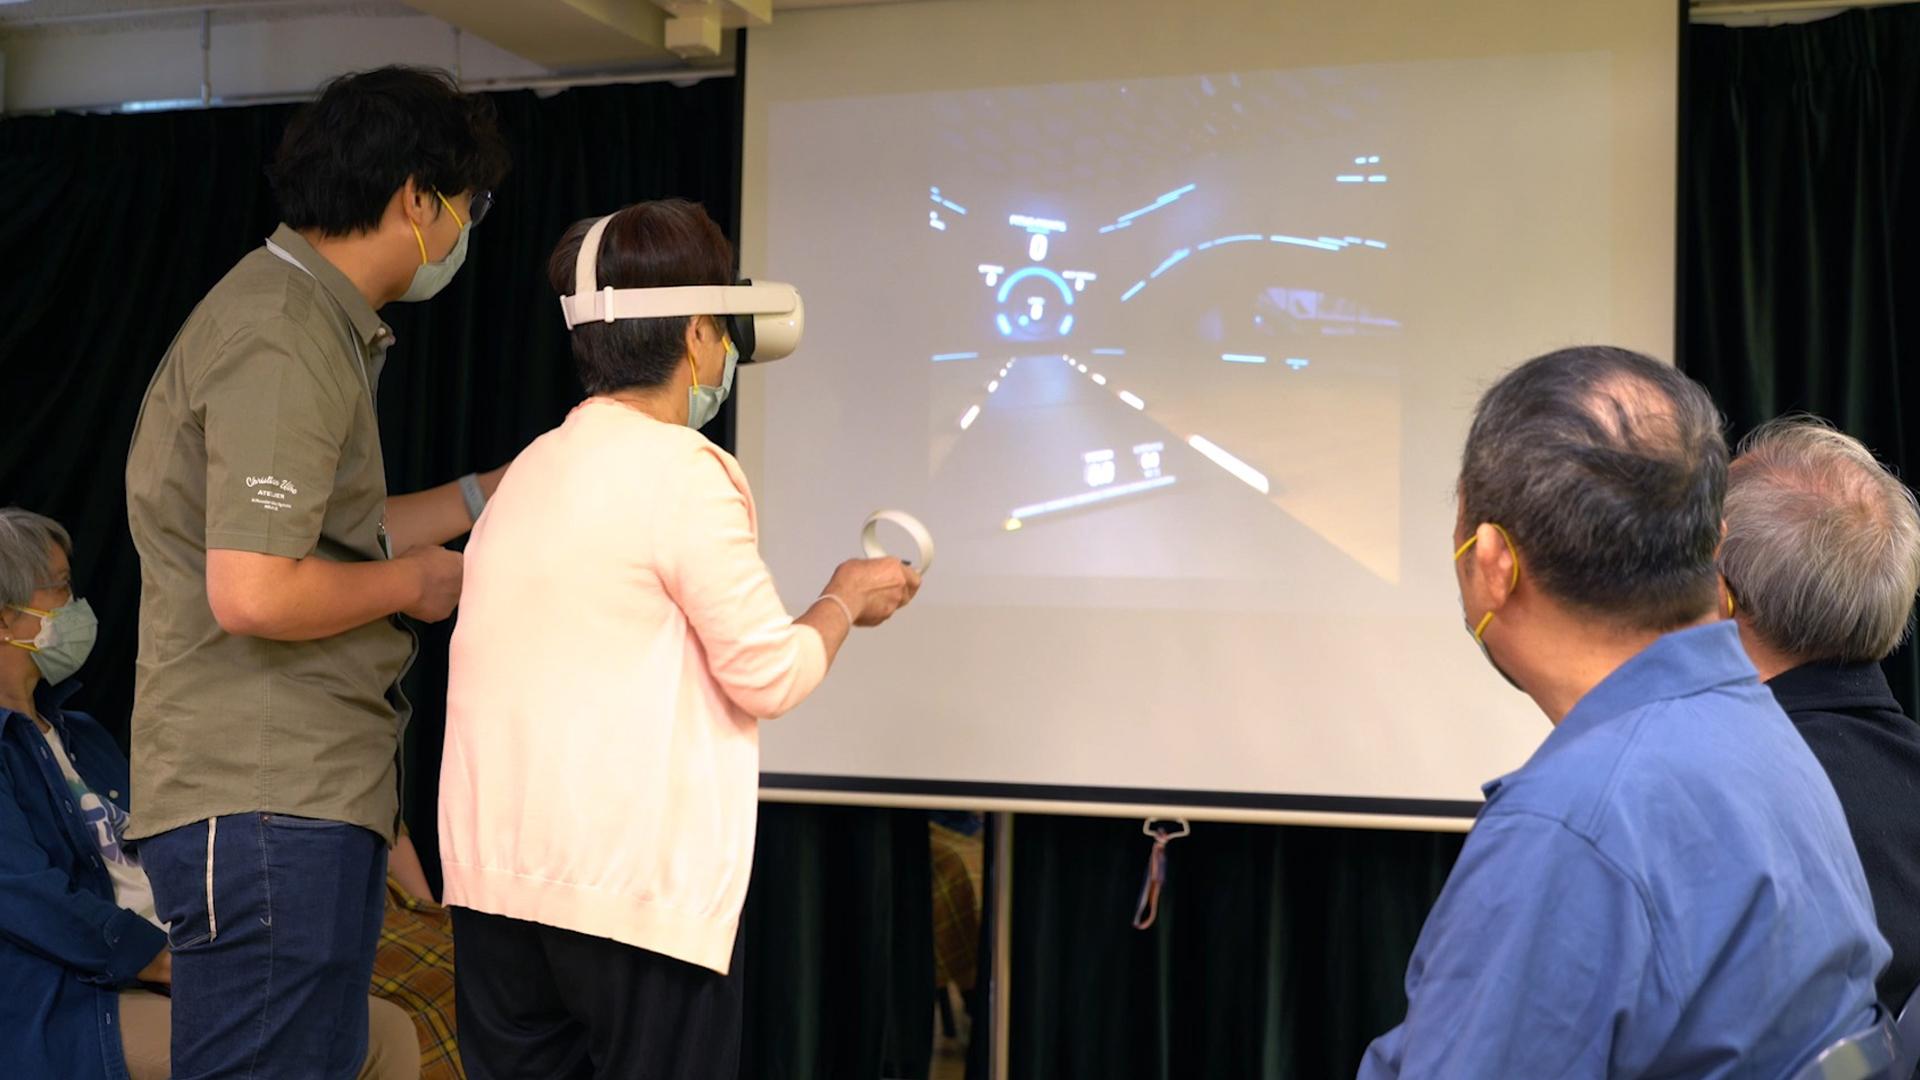 The Office of the Government Chief Information Officer announced today (June 14) that a new round of the ICT Outreach Programme for the Elderly was launched. Photo shows an elderly person learning virtual reality game devices in the previous round of the Programme.